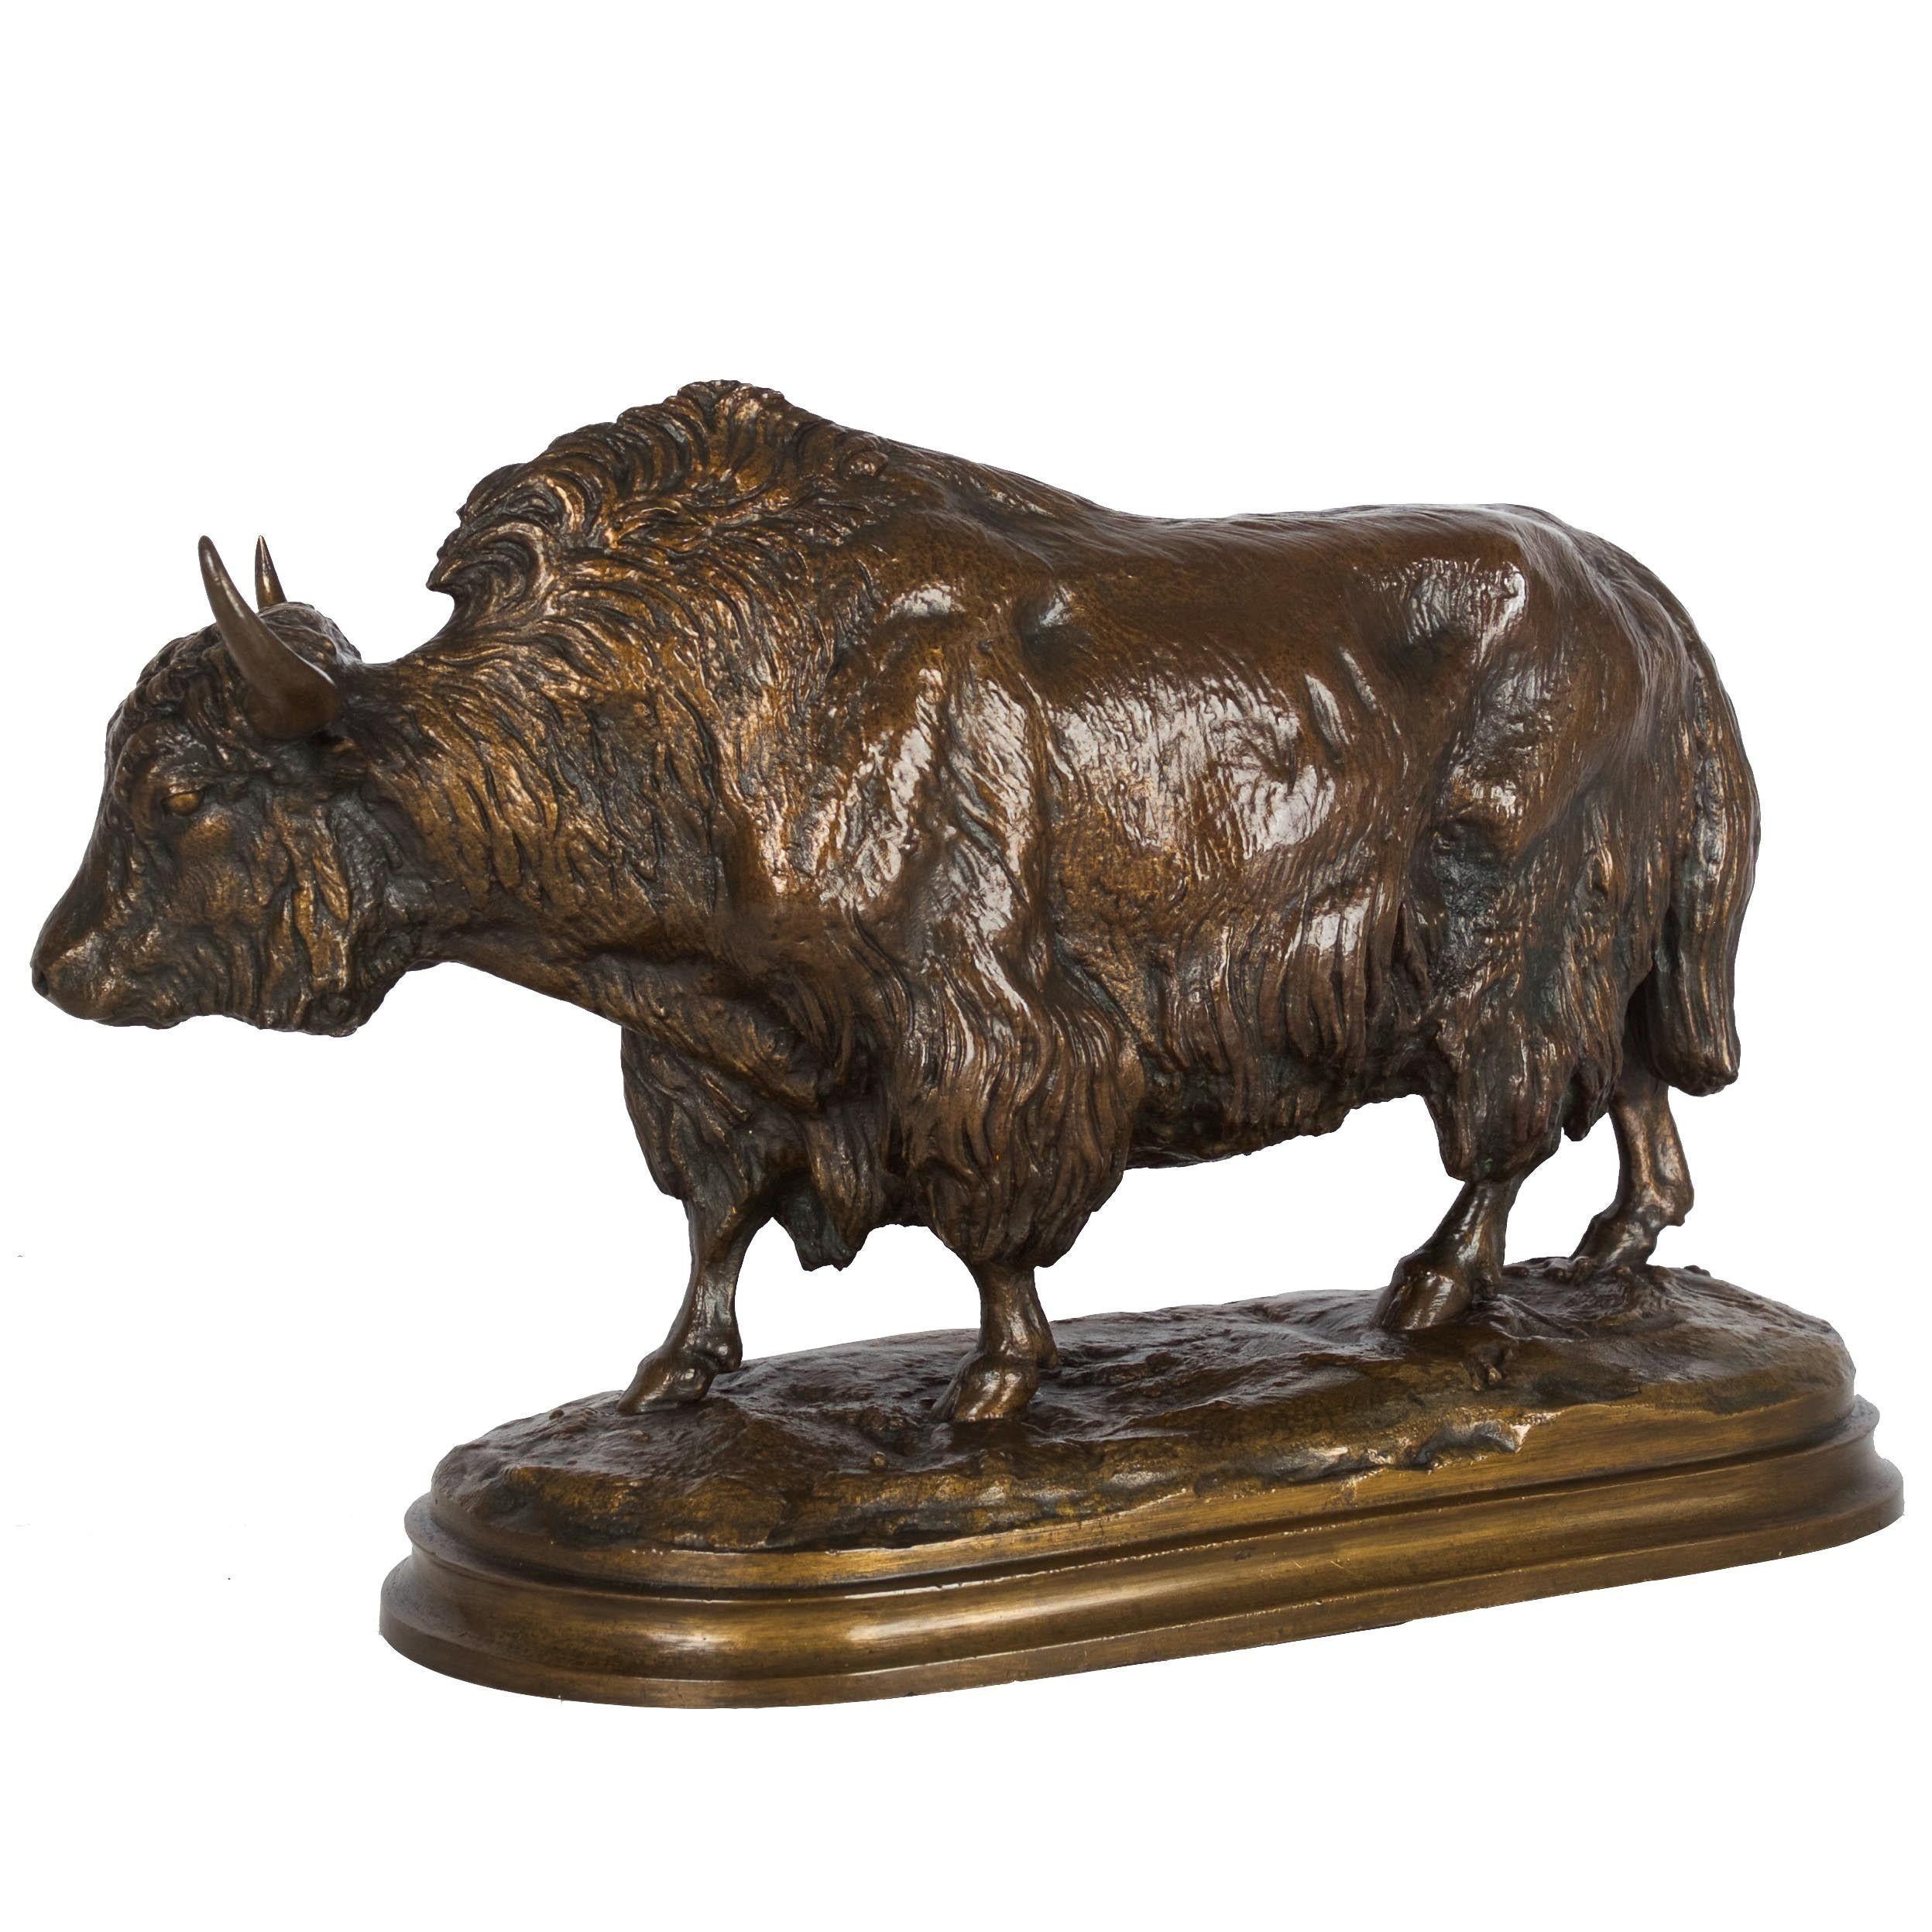 Rare French Antique Bronze Sculpture of European Bison by Isidore Bonheur c.1870 8